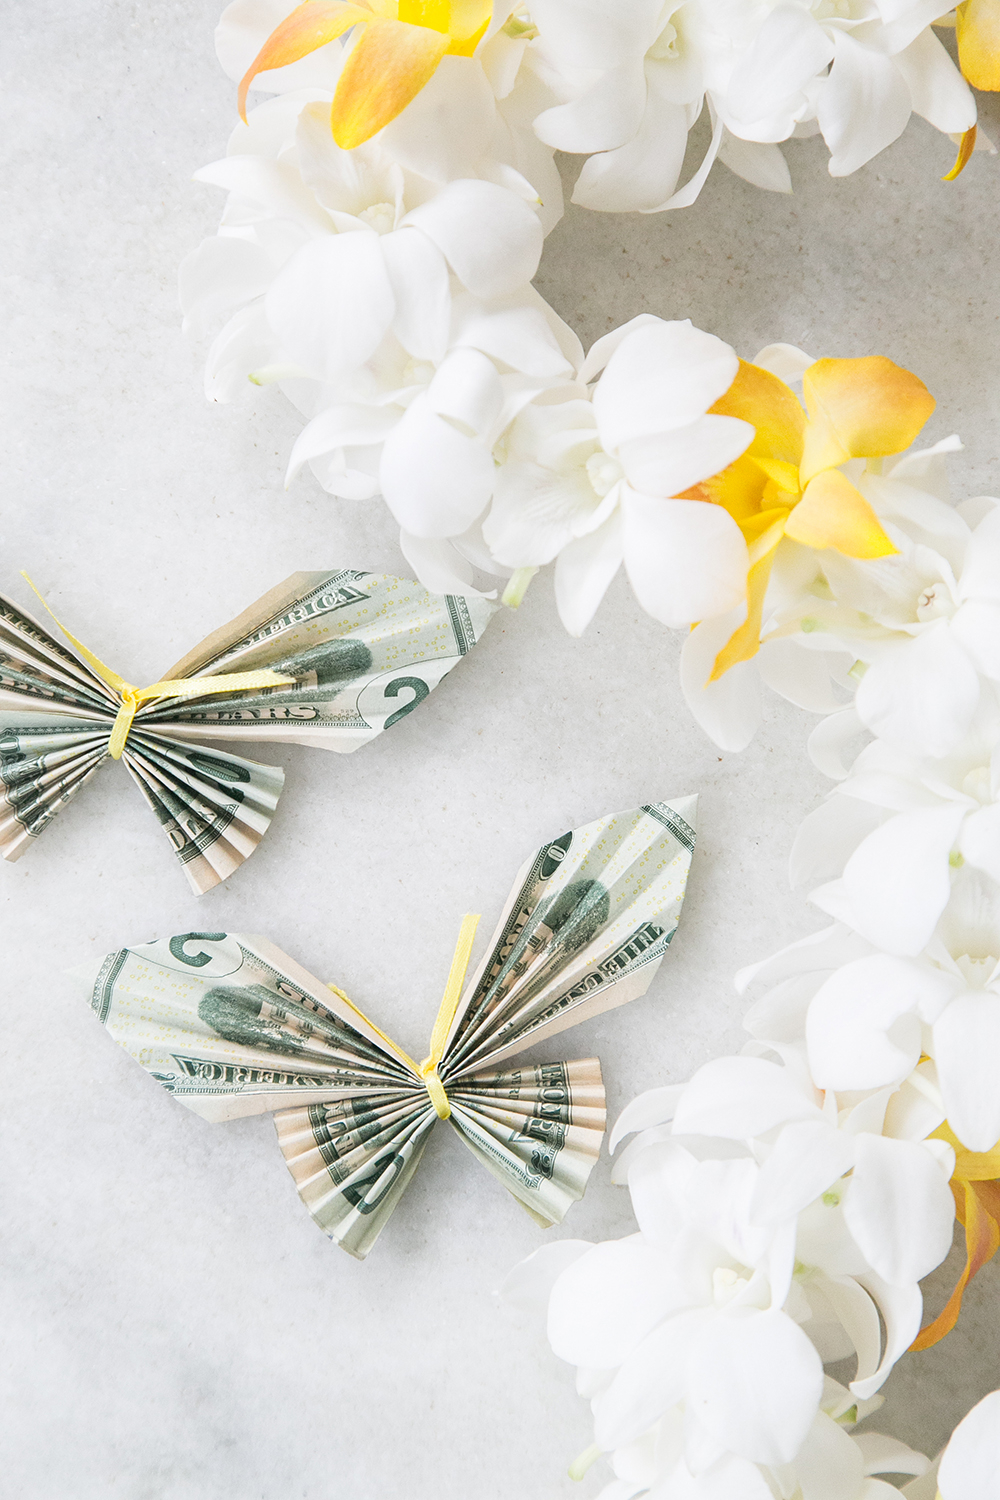 Origami Butterfly Dollar Bill Money Origami Butterfly Lei For Graduation Sugar And Charm